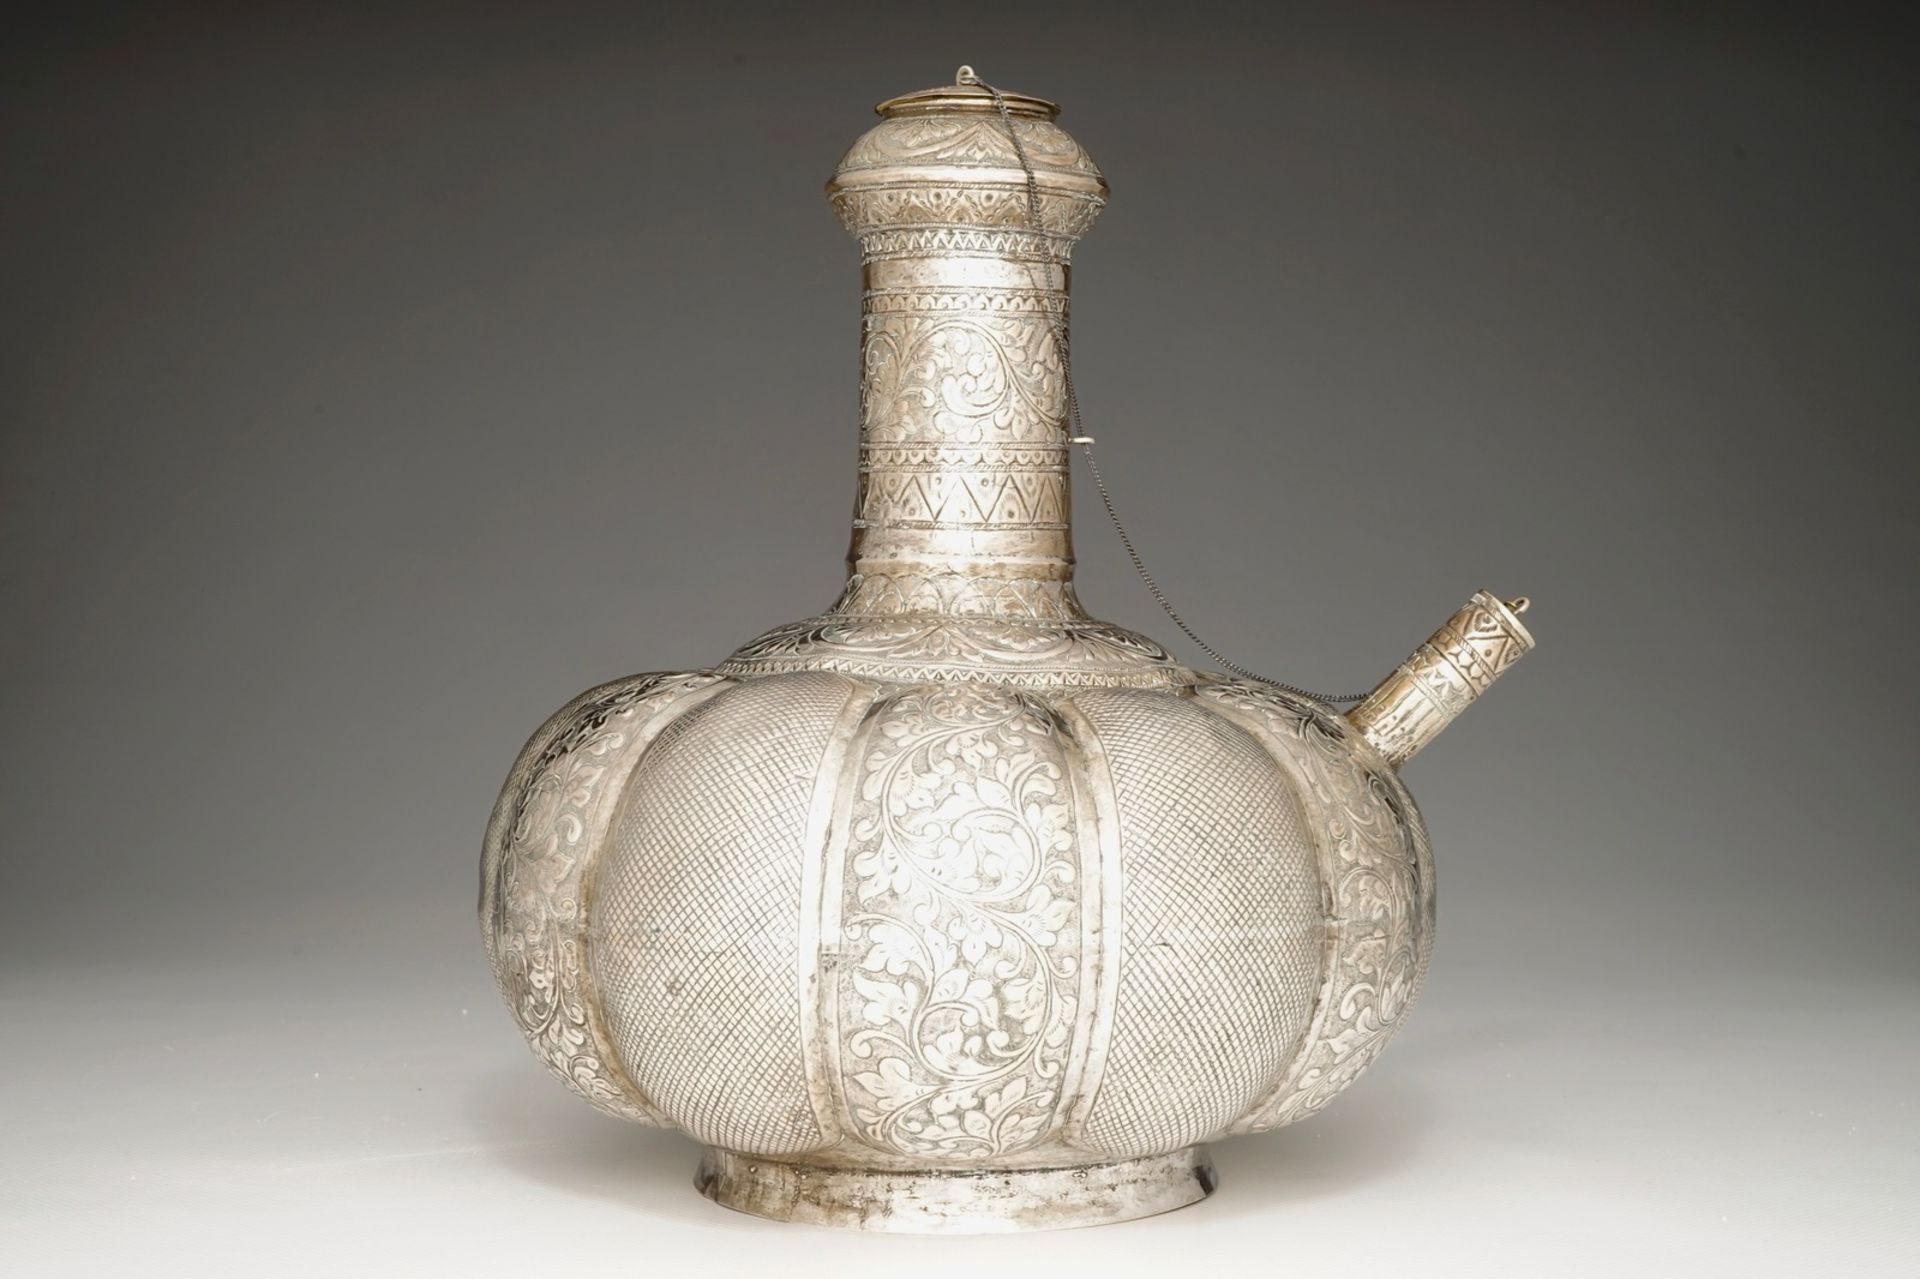 A silvered brass kendi, Mughal, India, 18/19th C. H.: 27 cm - L.: 24 cm We have more lots - Image 5 of 7